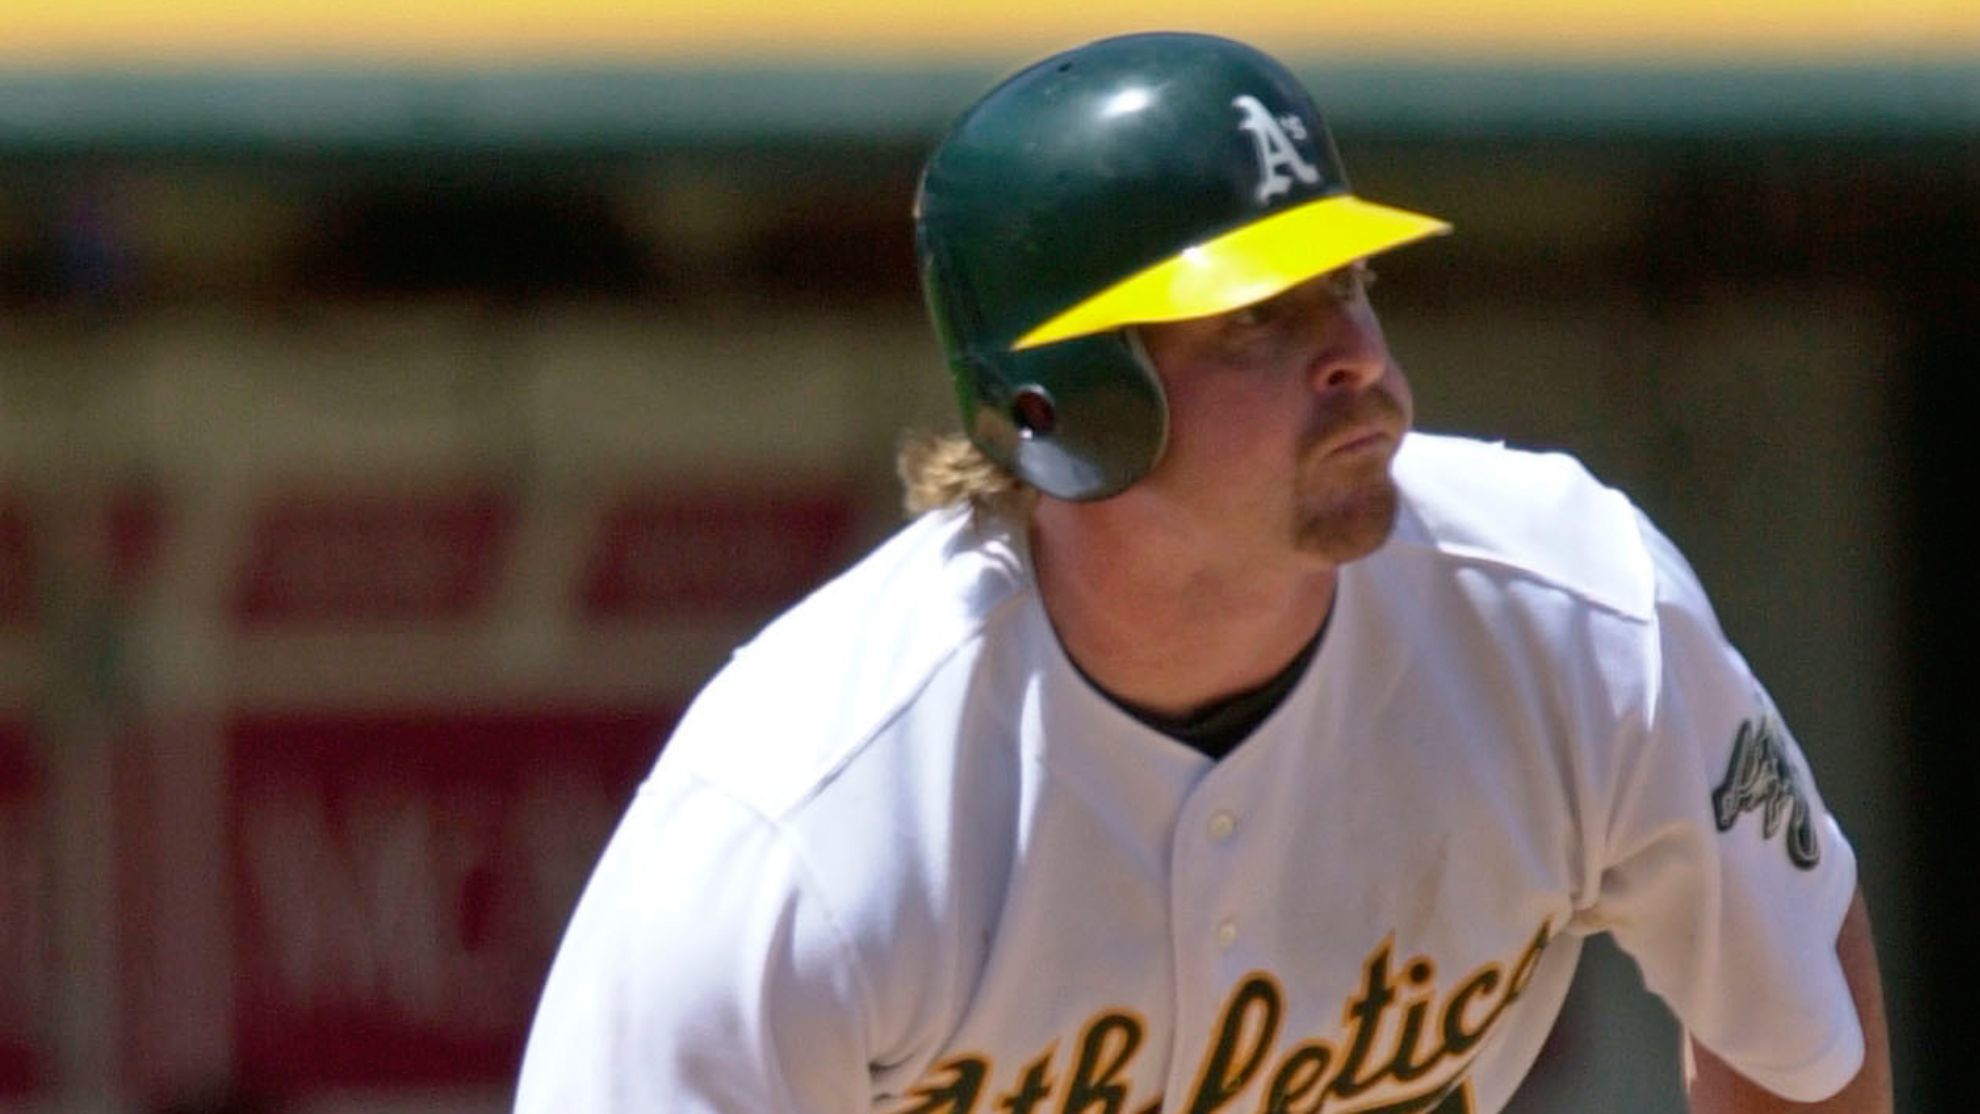 Former Red Sox player Jeremy Giambi dies at age 47